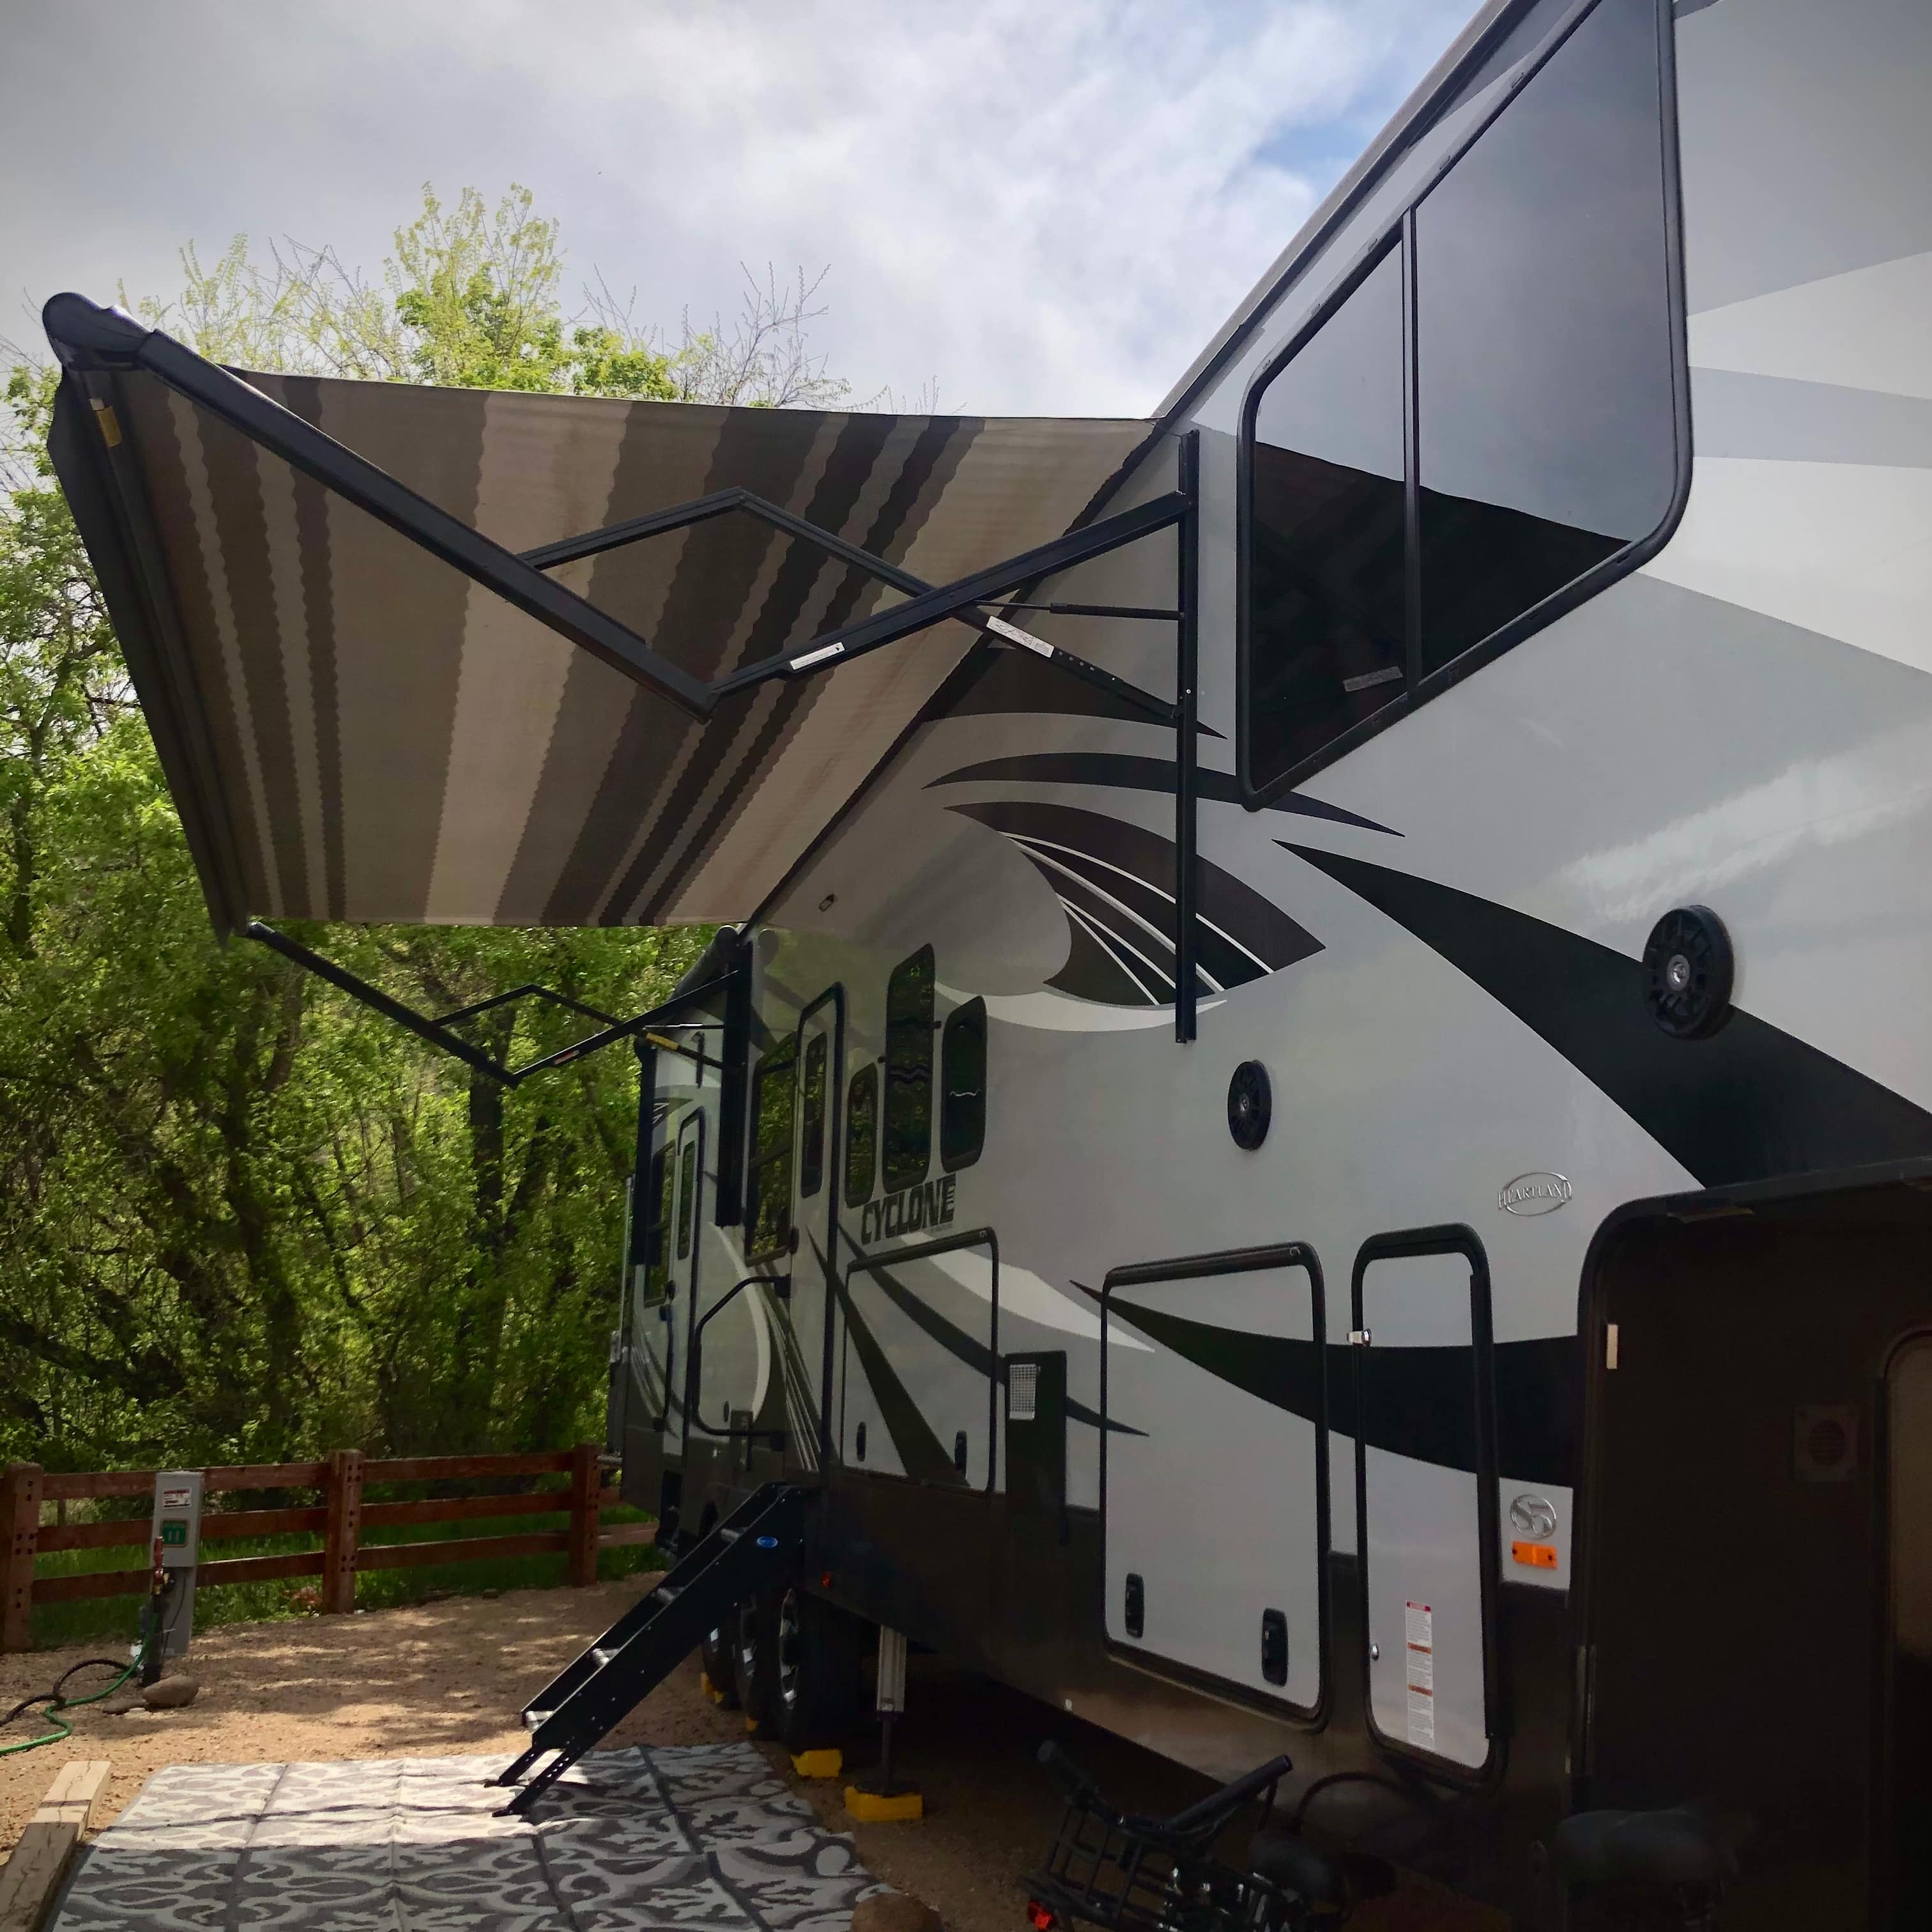 Our 5th wheel RV parked at Lavern M Johnson Park in Lyons, Colorado.